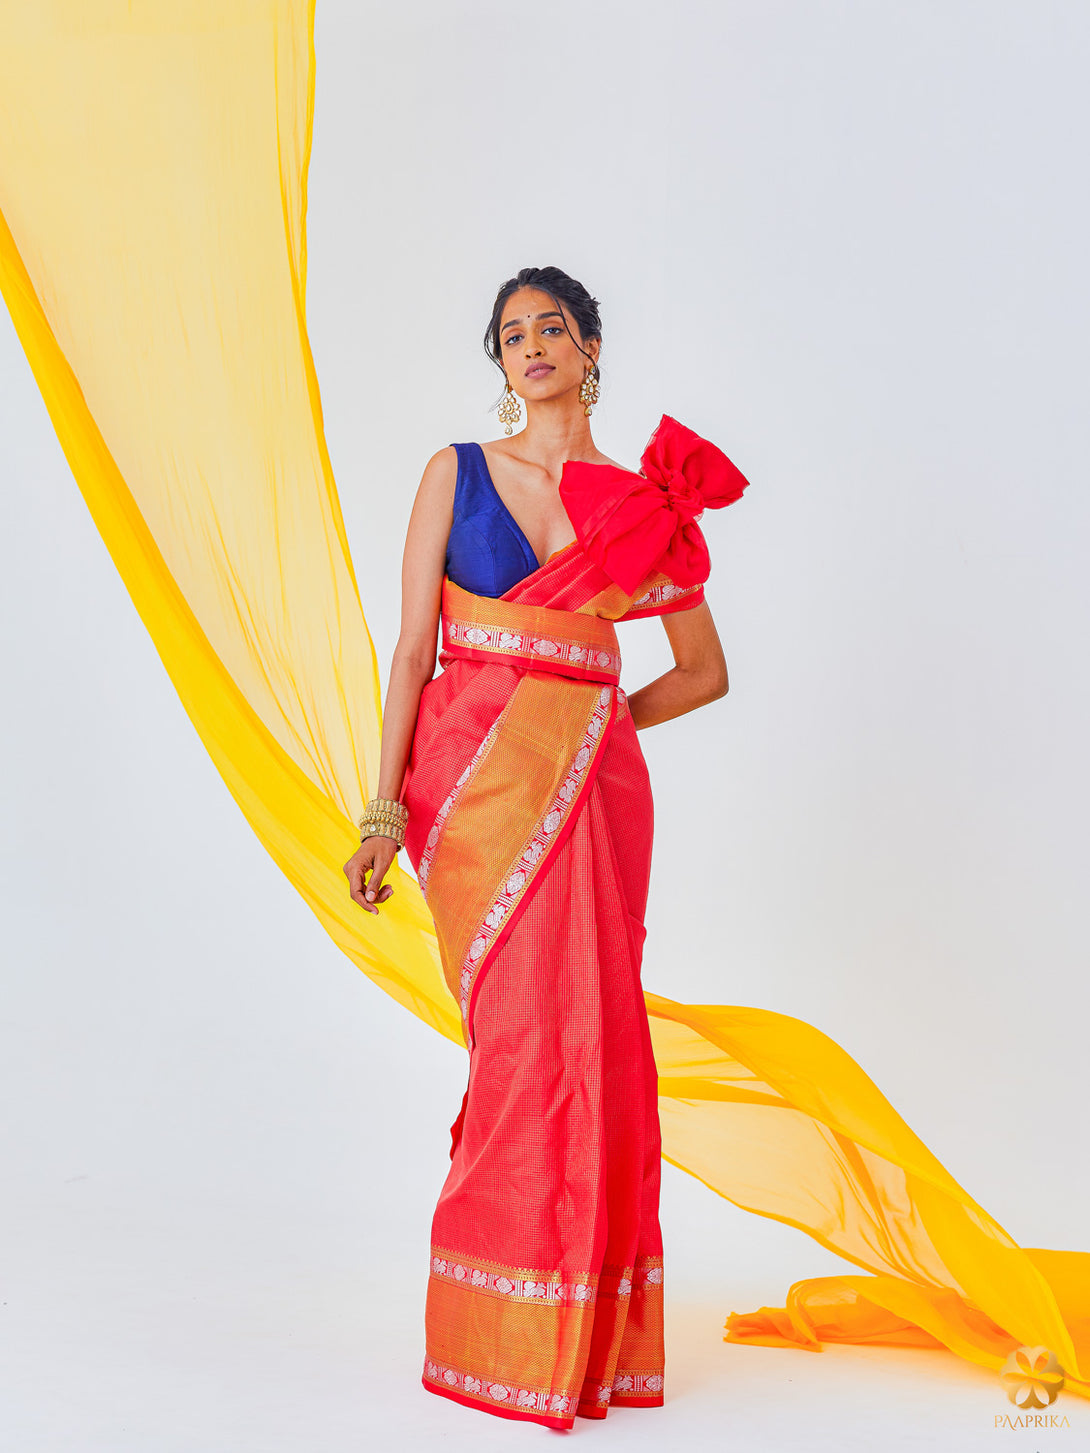 Exquisite Red Kanjivaram Saree with Small Checks - Elegance and Tradition Combined.